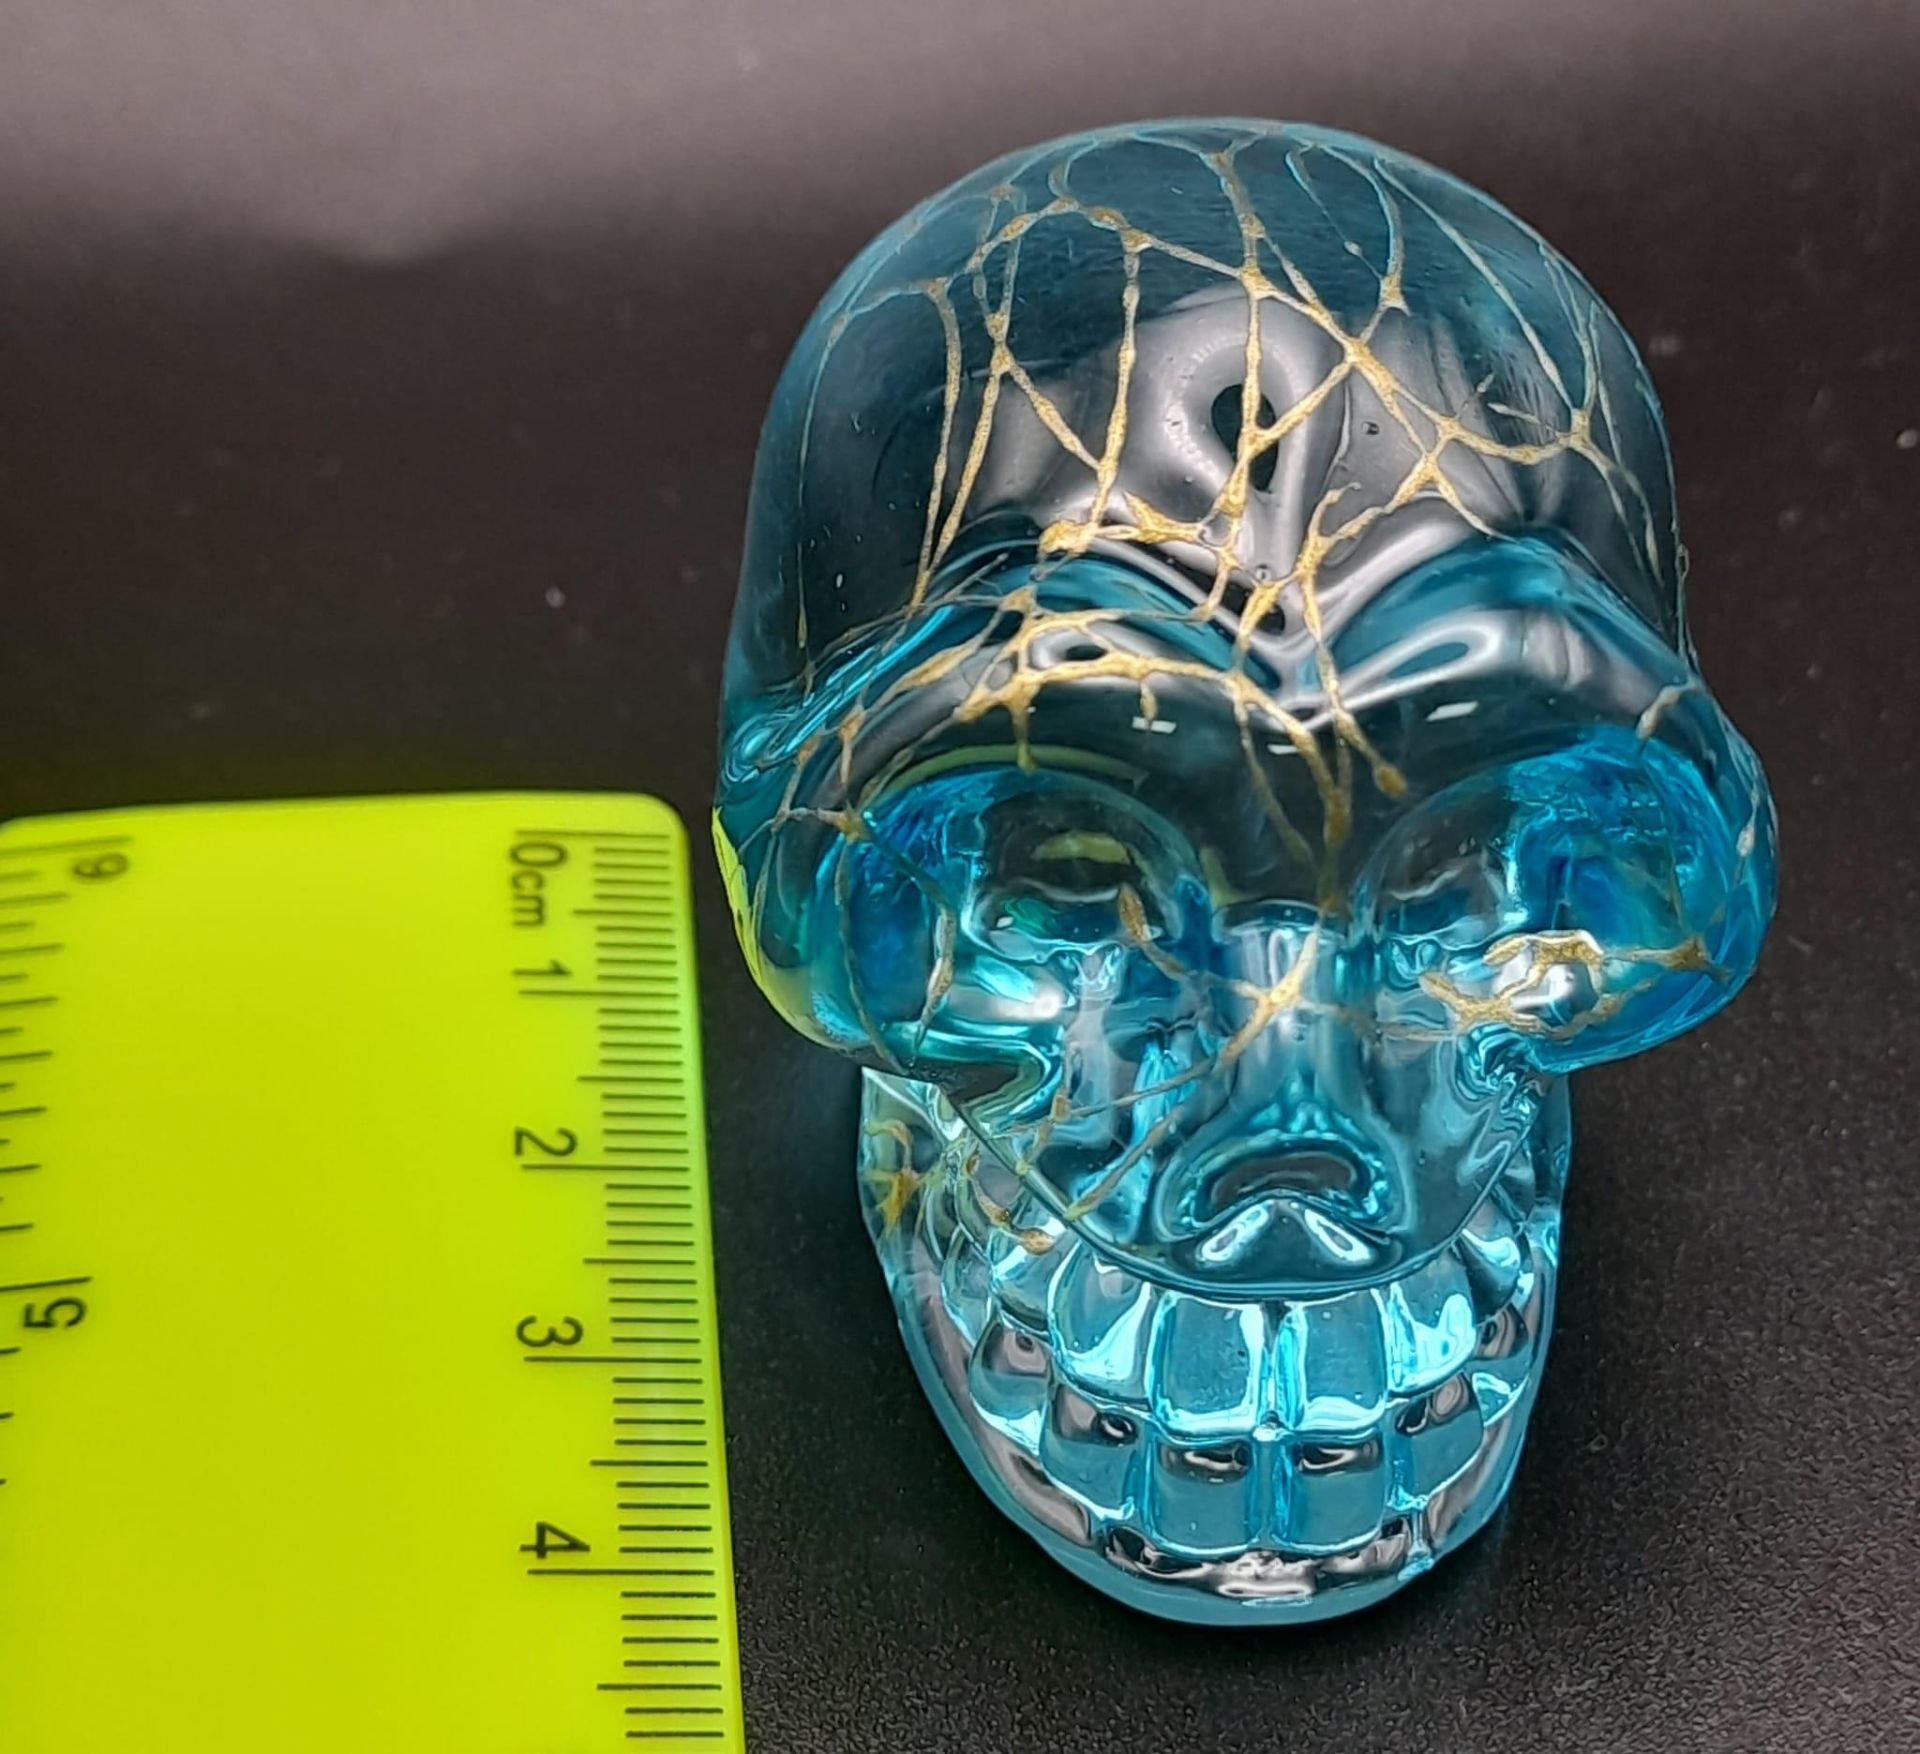 A Hand-Carved Blue Crystal Quartz Skull Figure. Paperweight or curiosity. %cm x 4cm - Image 5 of 5